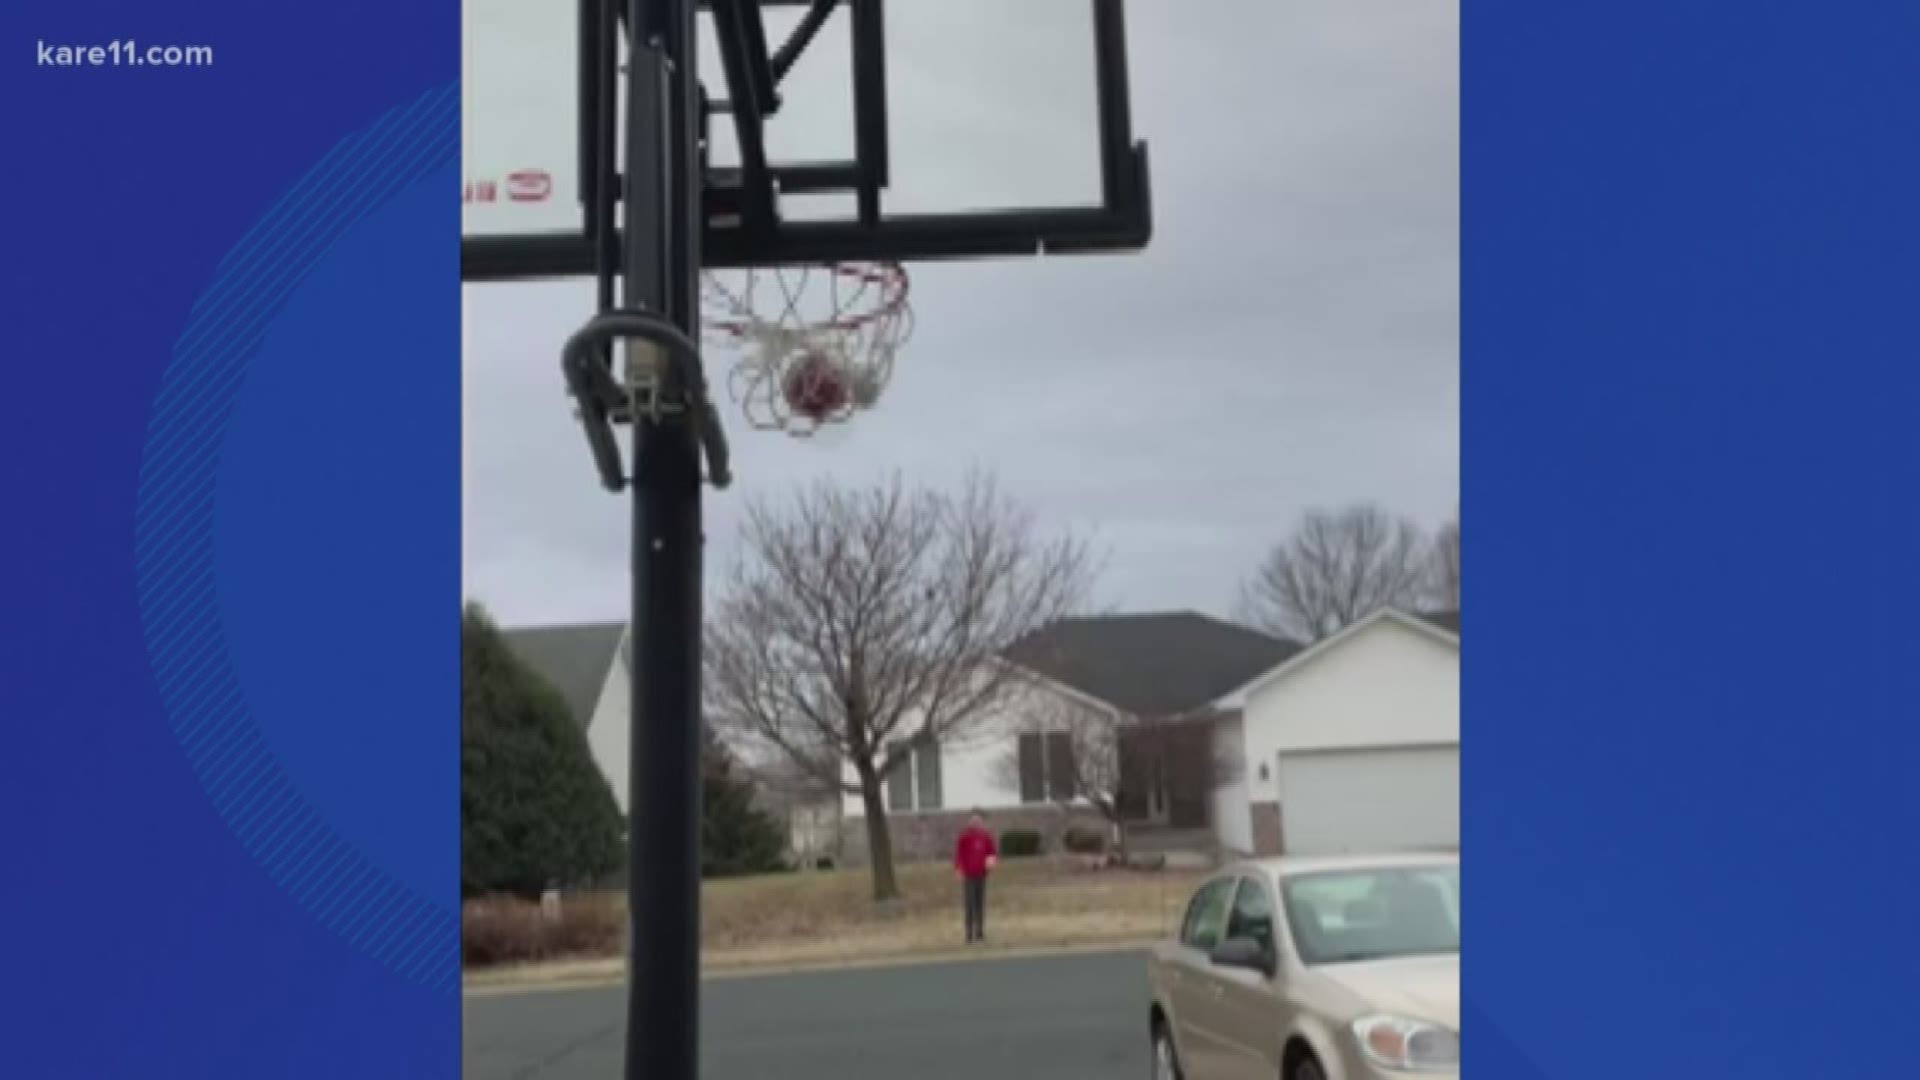 Viewers send in awesome videos of their sports skills.